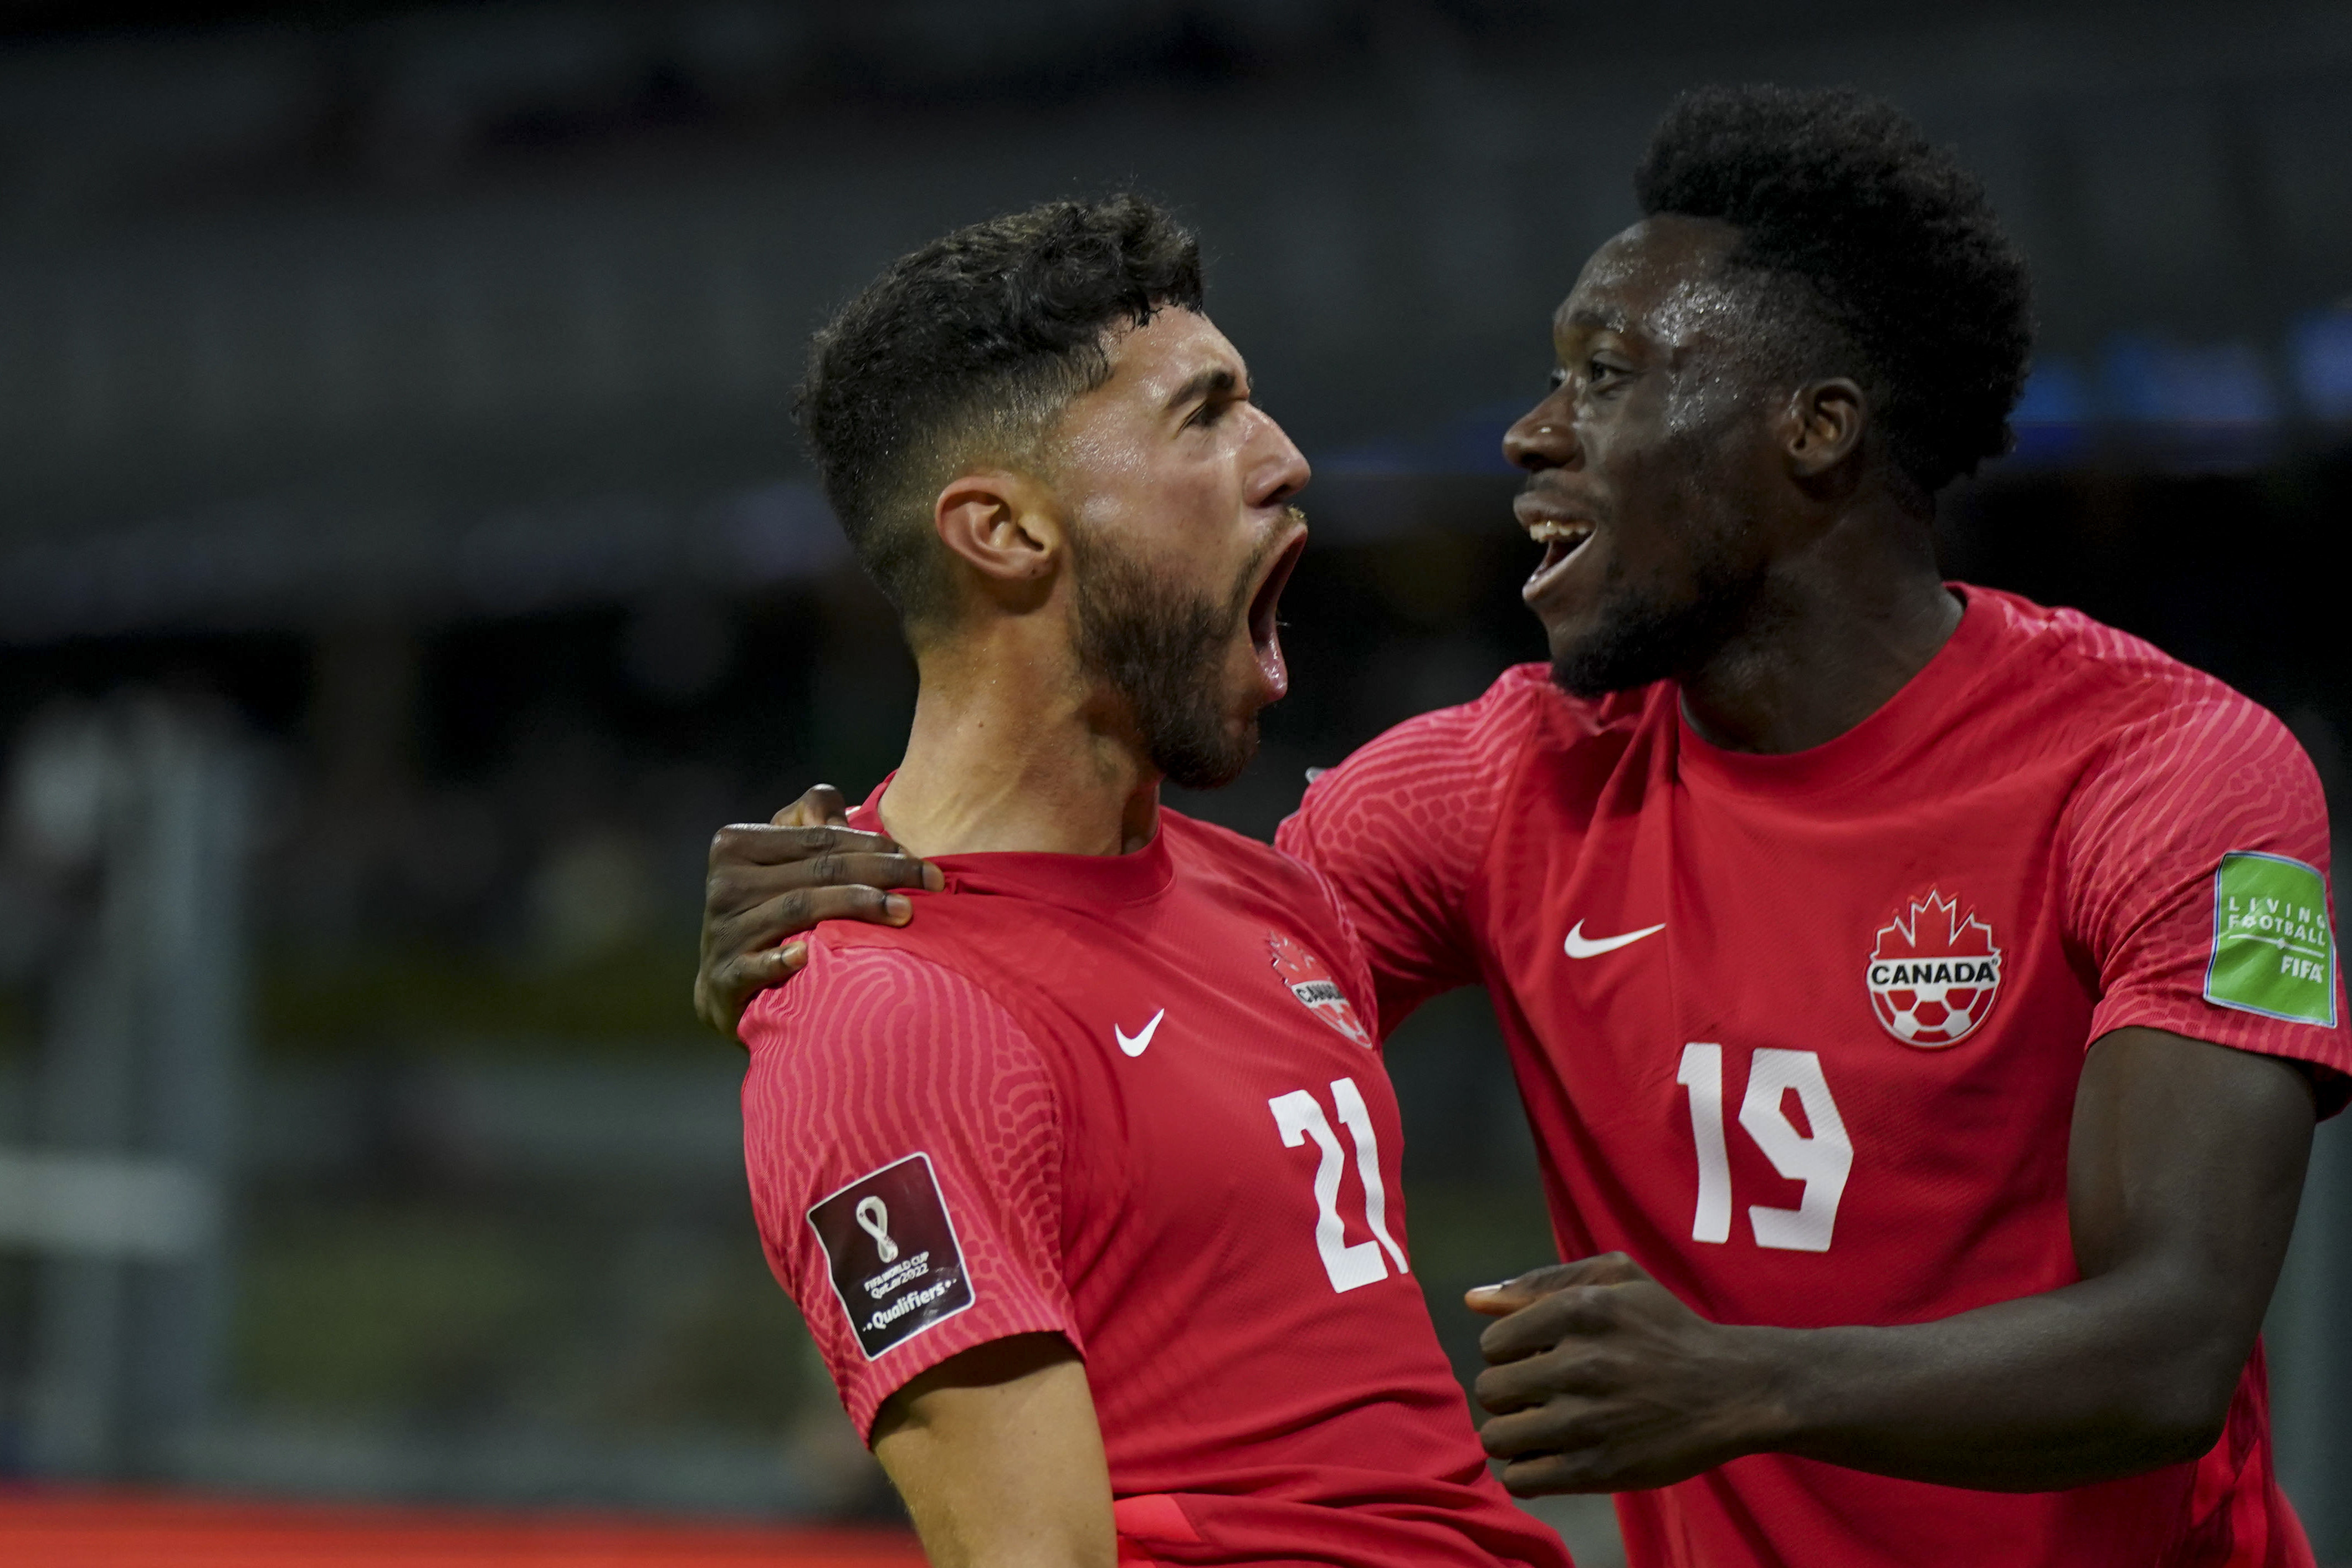 Canada at World Cup 2022: Canada falls to Belgium in opener